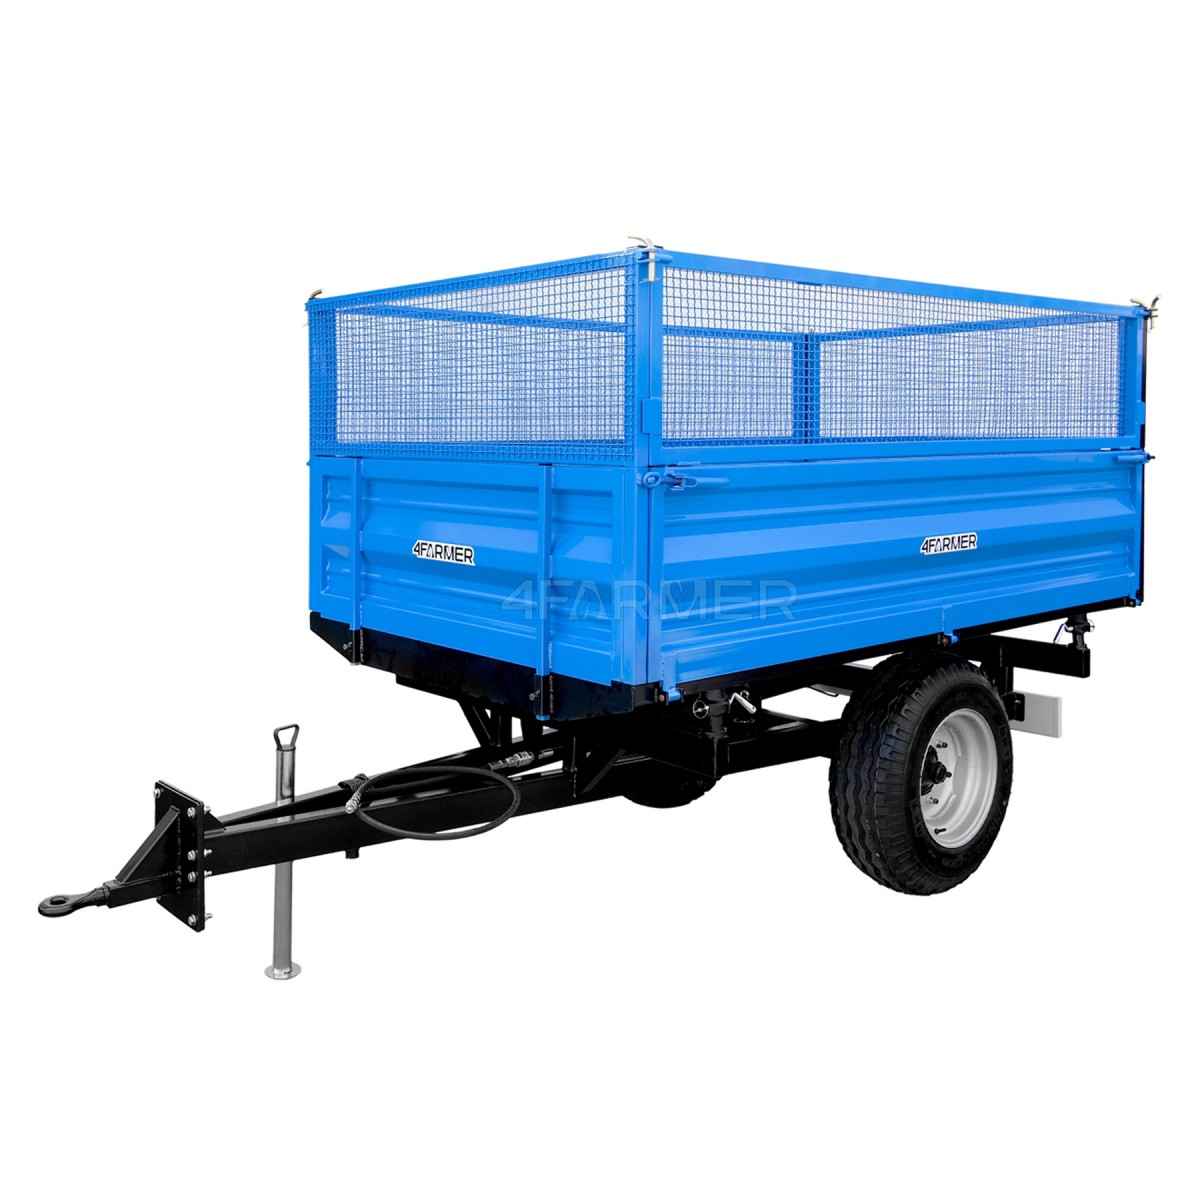 Single-axle agricultural trailer 2T with kiper and mesh extensions 4FARMER